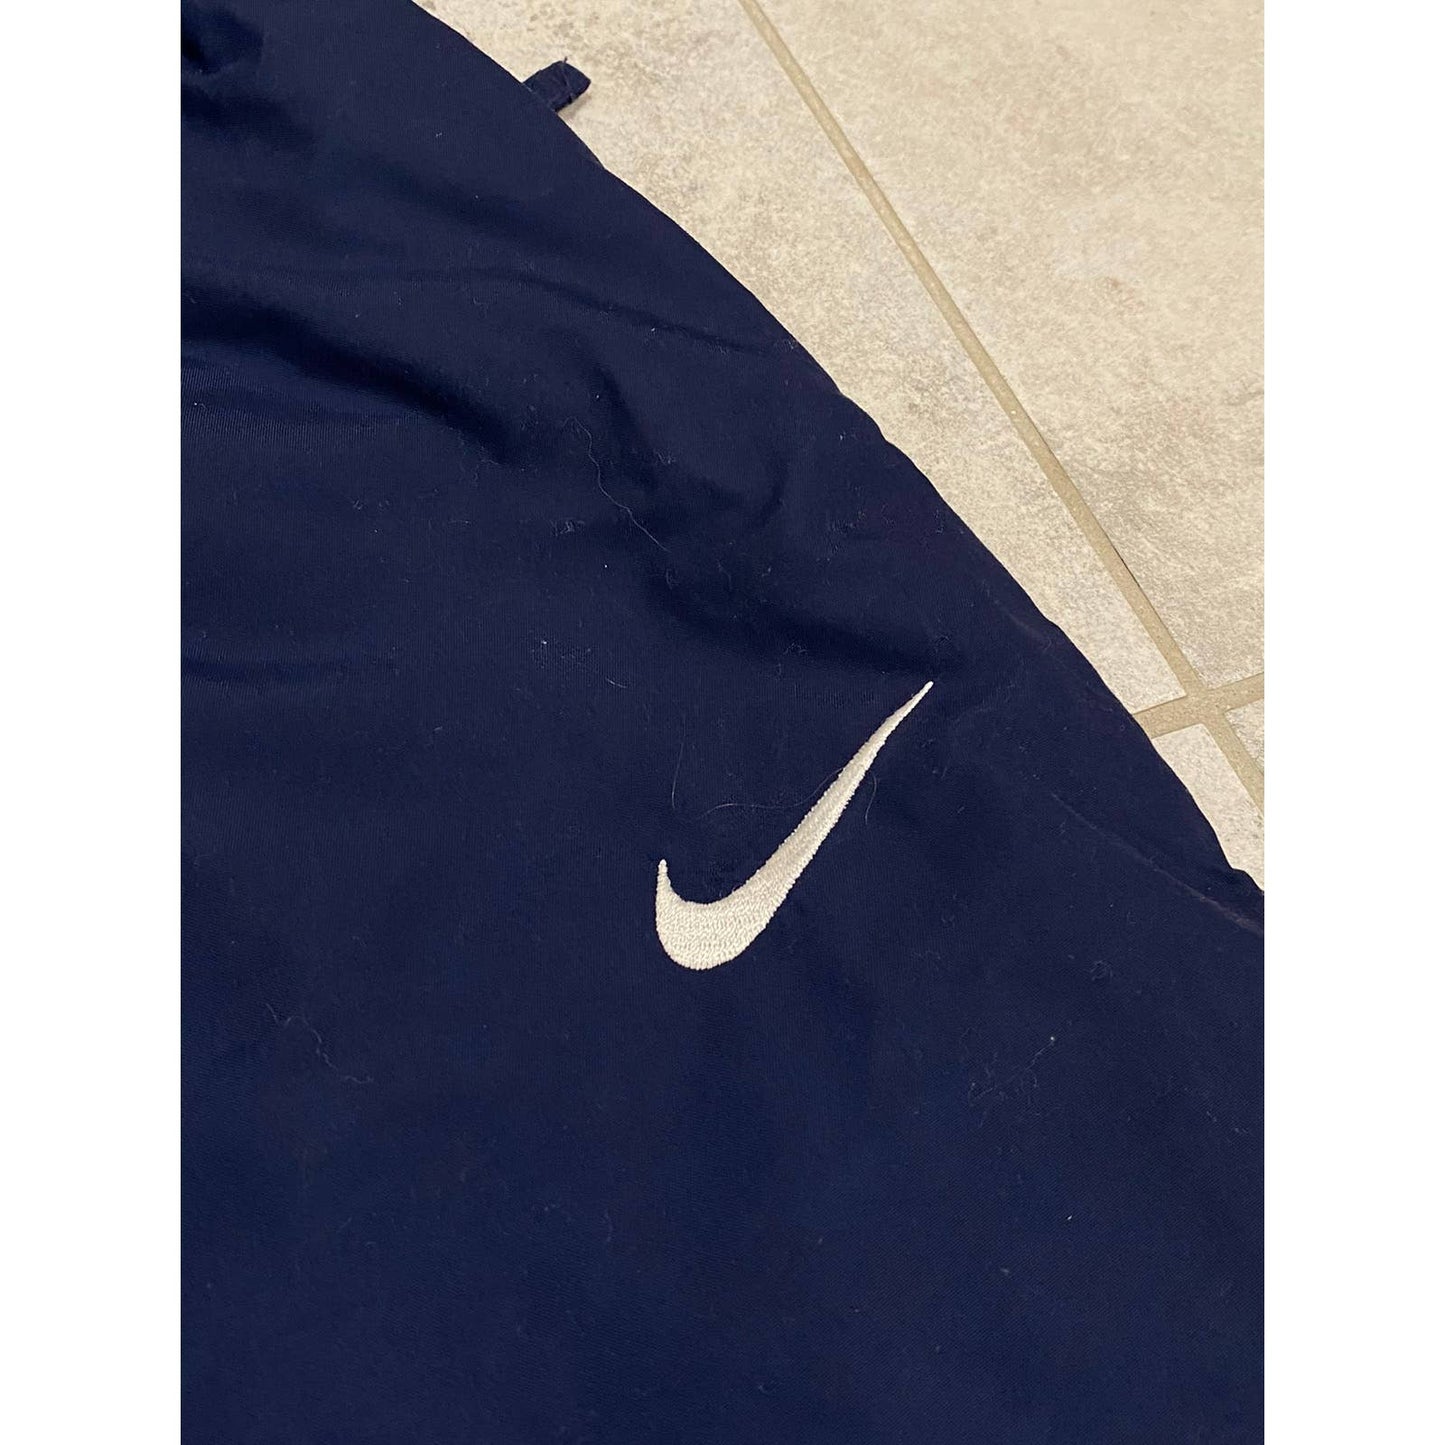 Nike vintage navy track pants small swoosh – Refitted